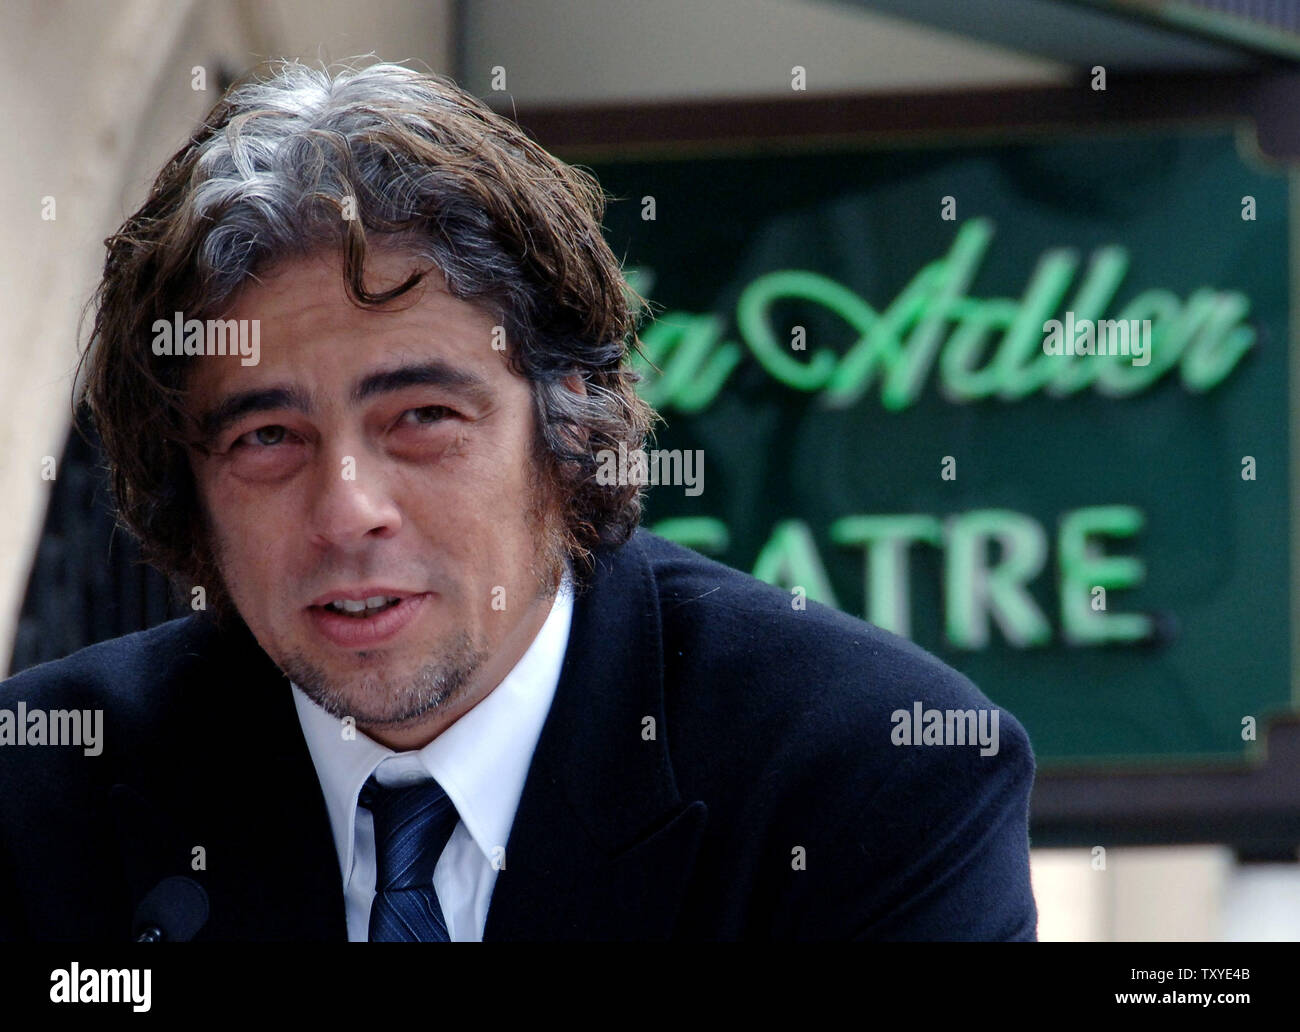 Actor Benicio Del Toro speaks during a posthumous ceremony honoring his late acting teacher Stella Adler with the 2,315th star on the Hollywood Walk of Fame in Los Angeles, California on August 4, 2006. Adler was creator of a unique American approach to acting and was the only American ever to have directly studied with the father of modern acting, Constantine Stanislavsky. In 1949, Adler founded a school now known as the Stella Adler Studio of Acting. Her student list reads like a who's who of Hollywood: Marlon Brandon, Robert De Niro, Harvey Keitel, Candice Bergen, Warren Beatty and Benicio Stock Photo